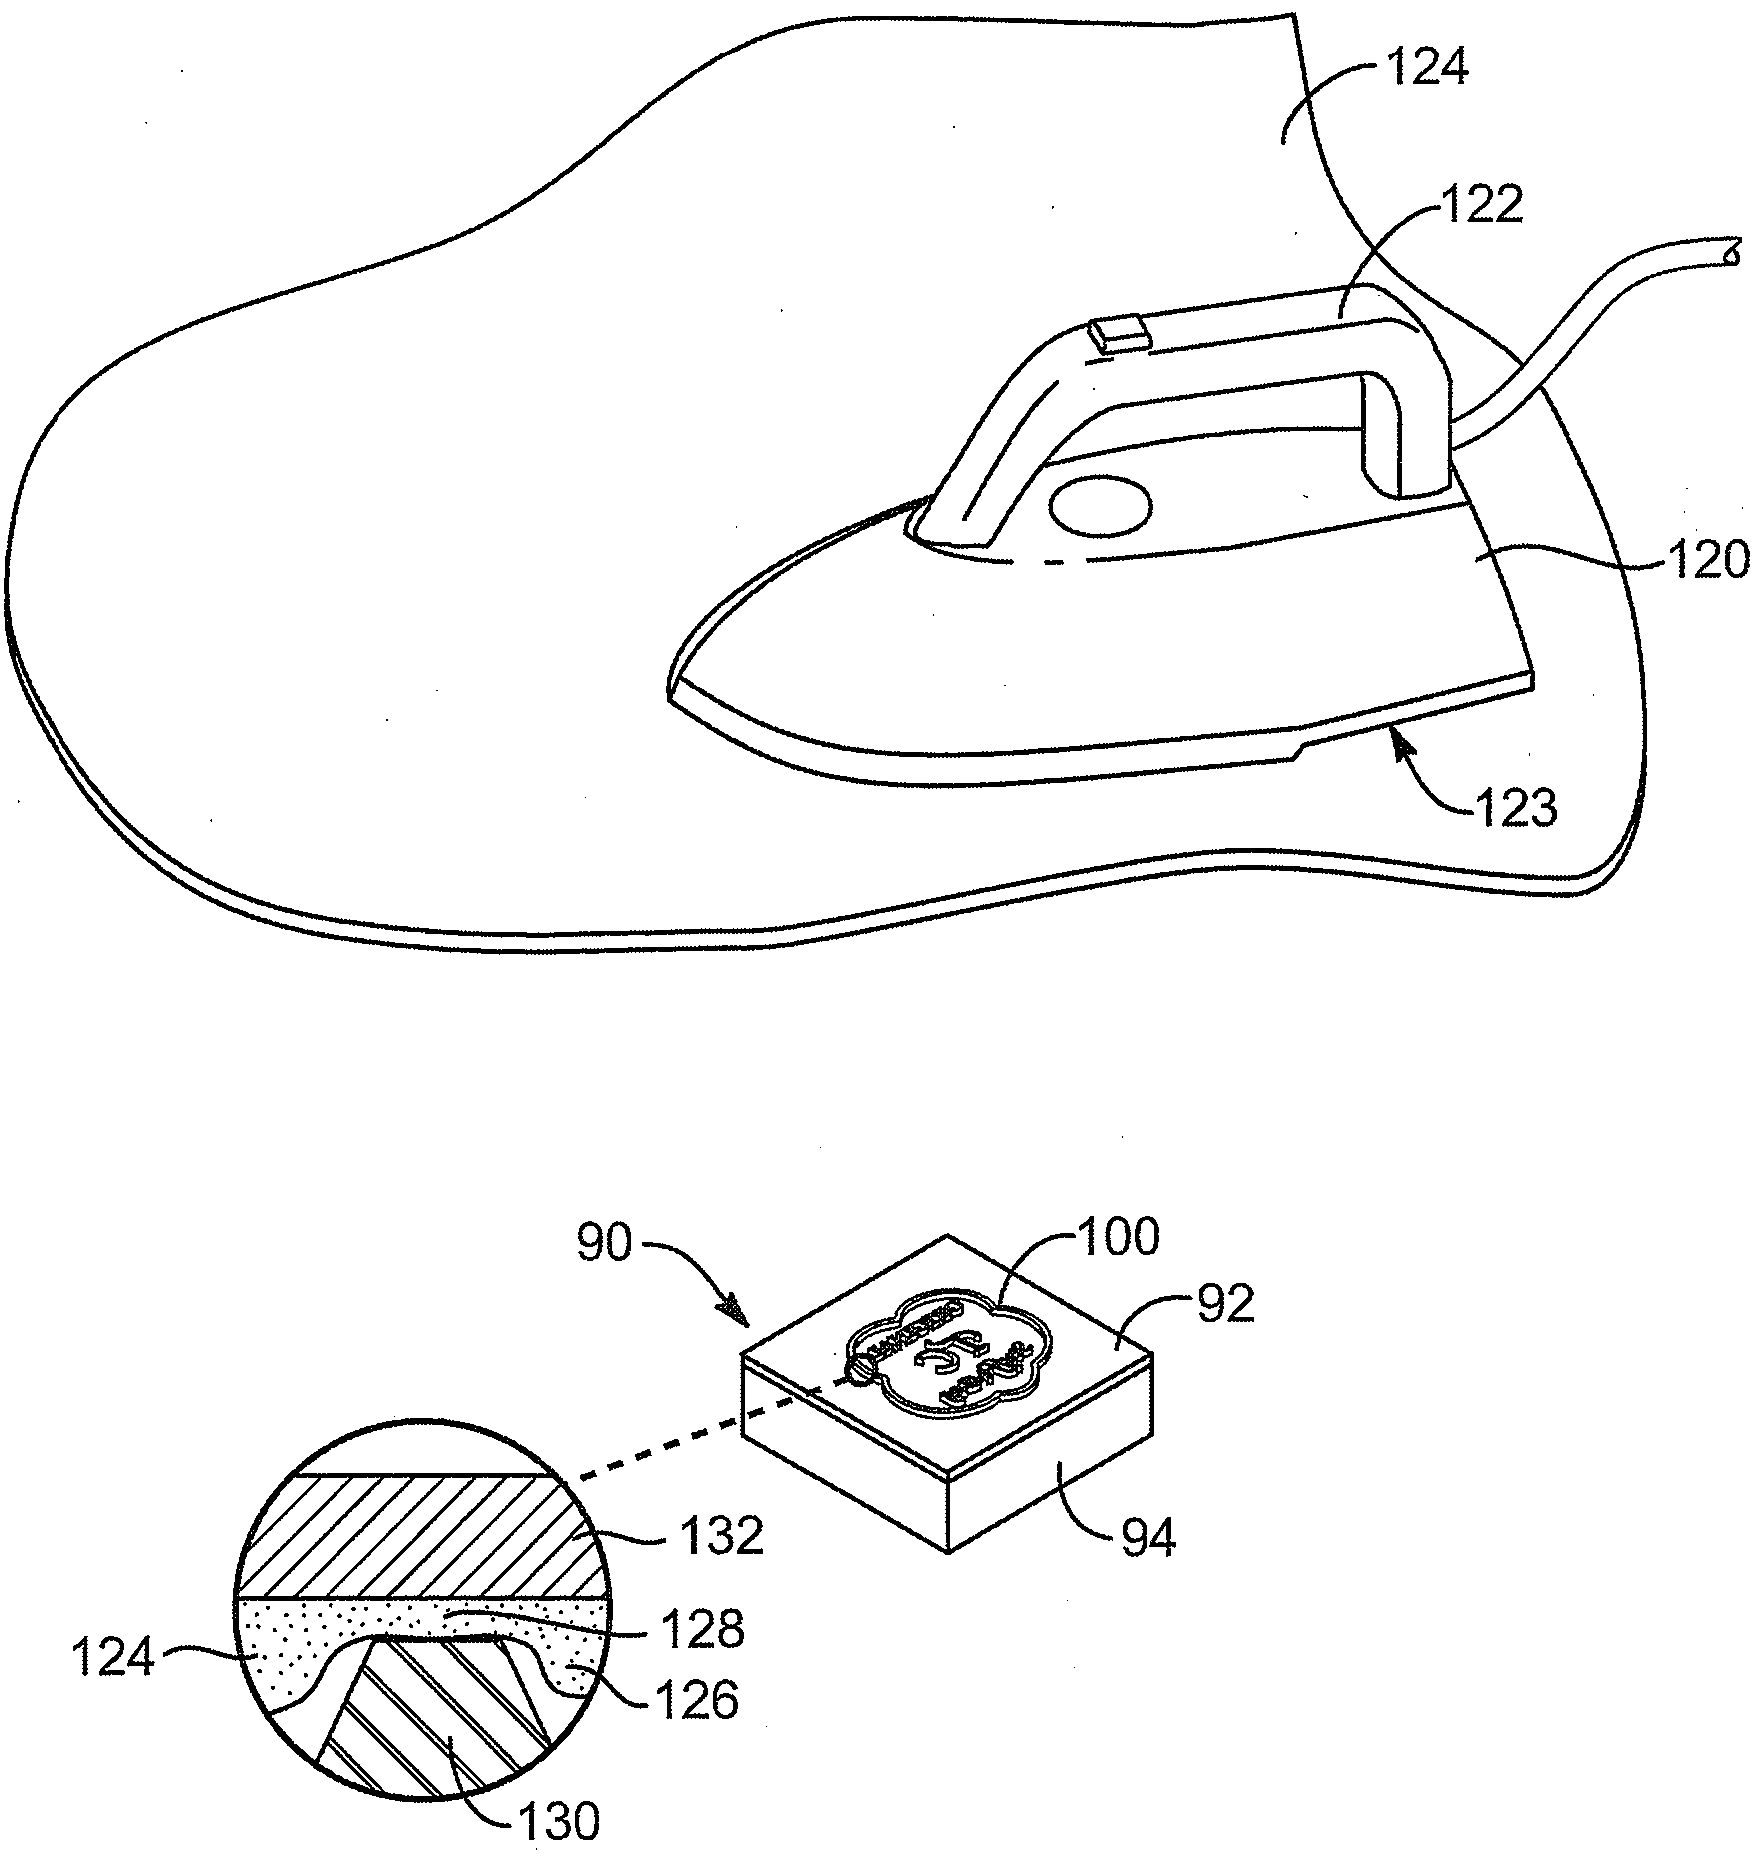 Integrated tote and pillow apparatus and method